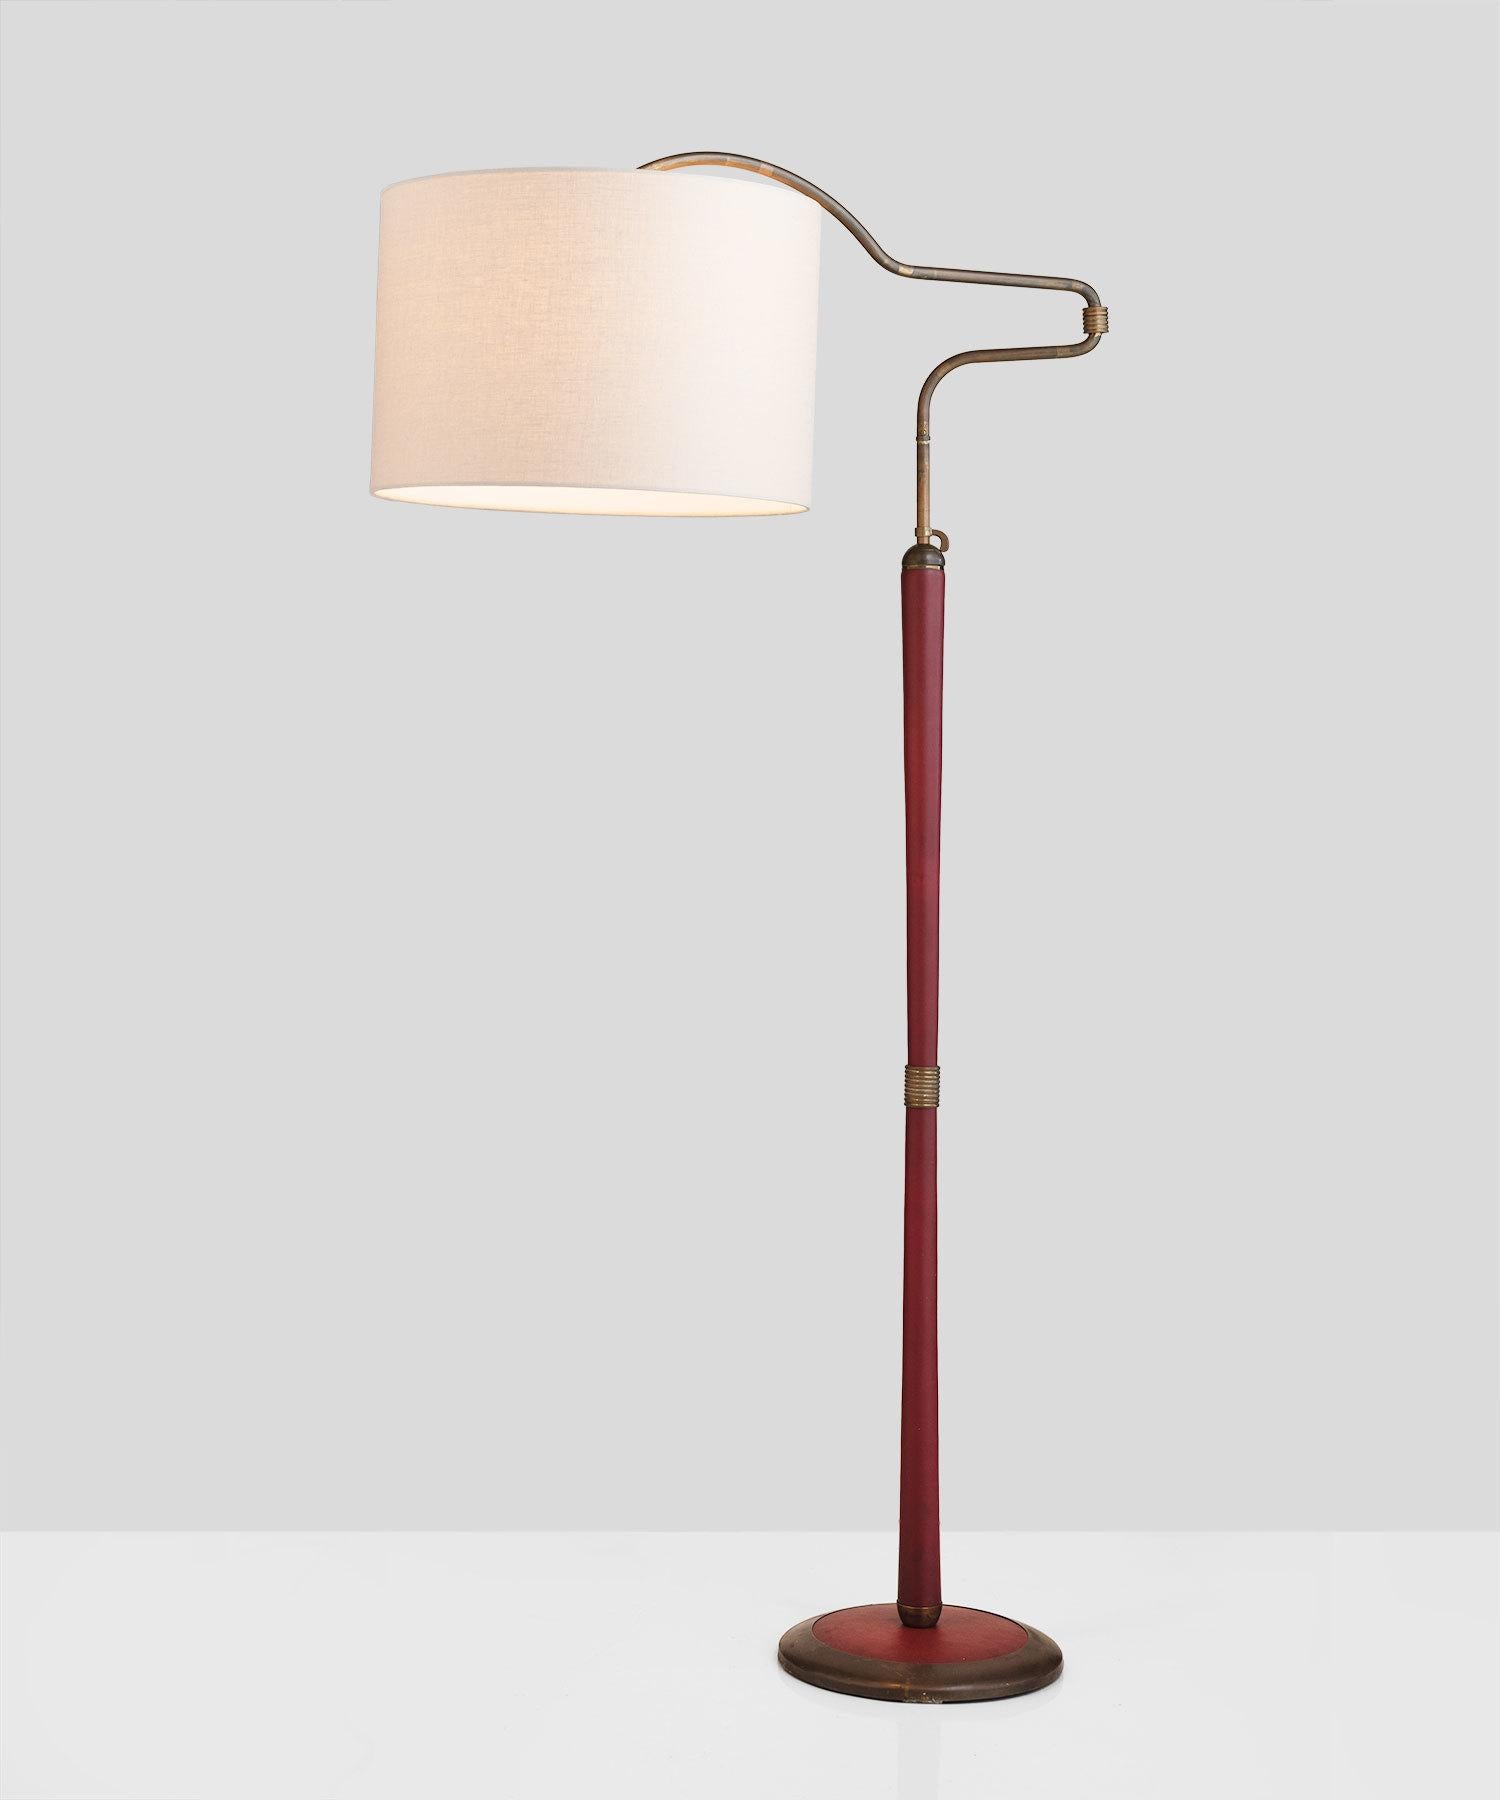 Red leather floor lamp, Italy, circa 1950.

Leather-wrapped stand includes brass detailing throughout and multiple points of adjustment. New linen shade.

Measures: 36” W x 18.5” D x 66 - 78” H.